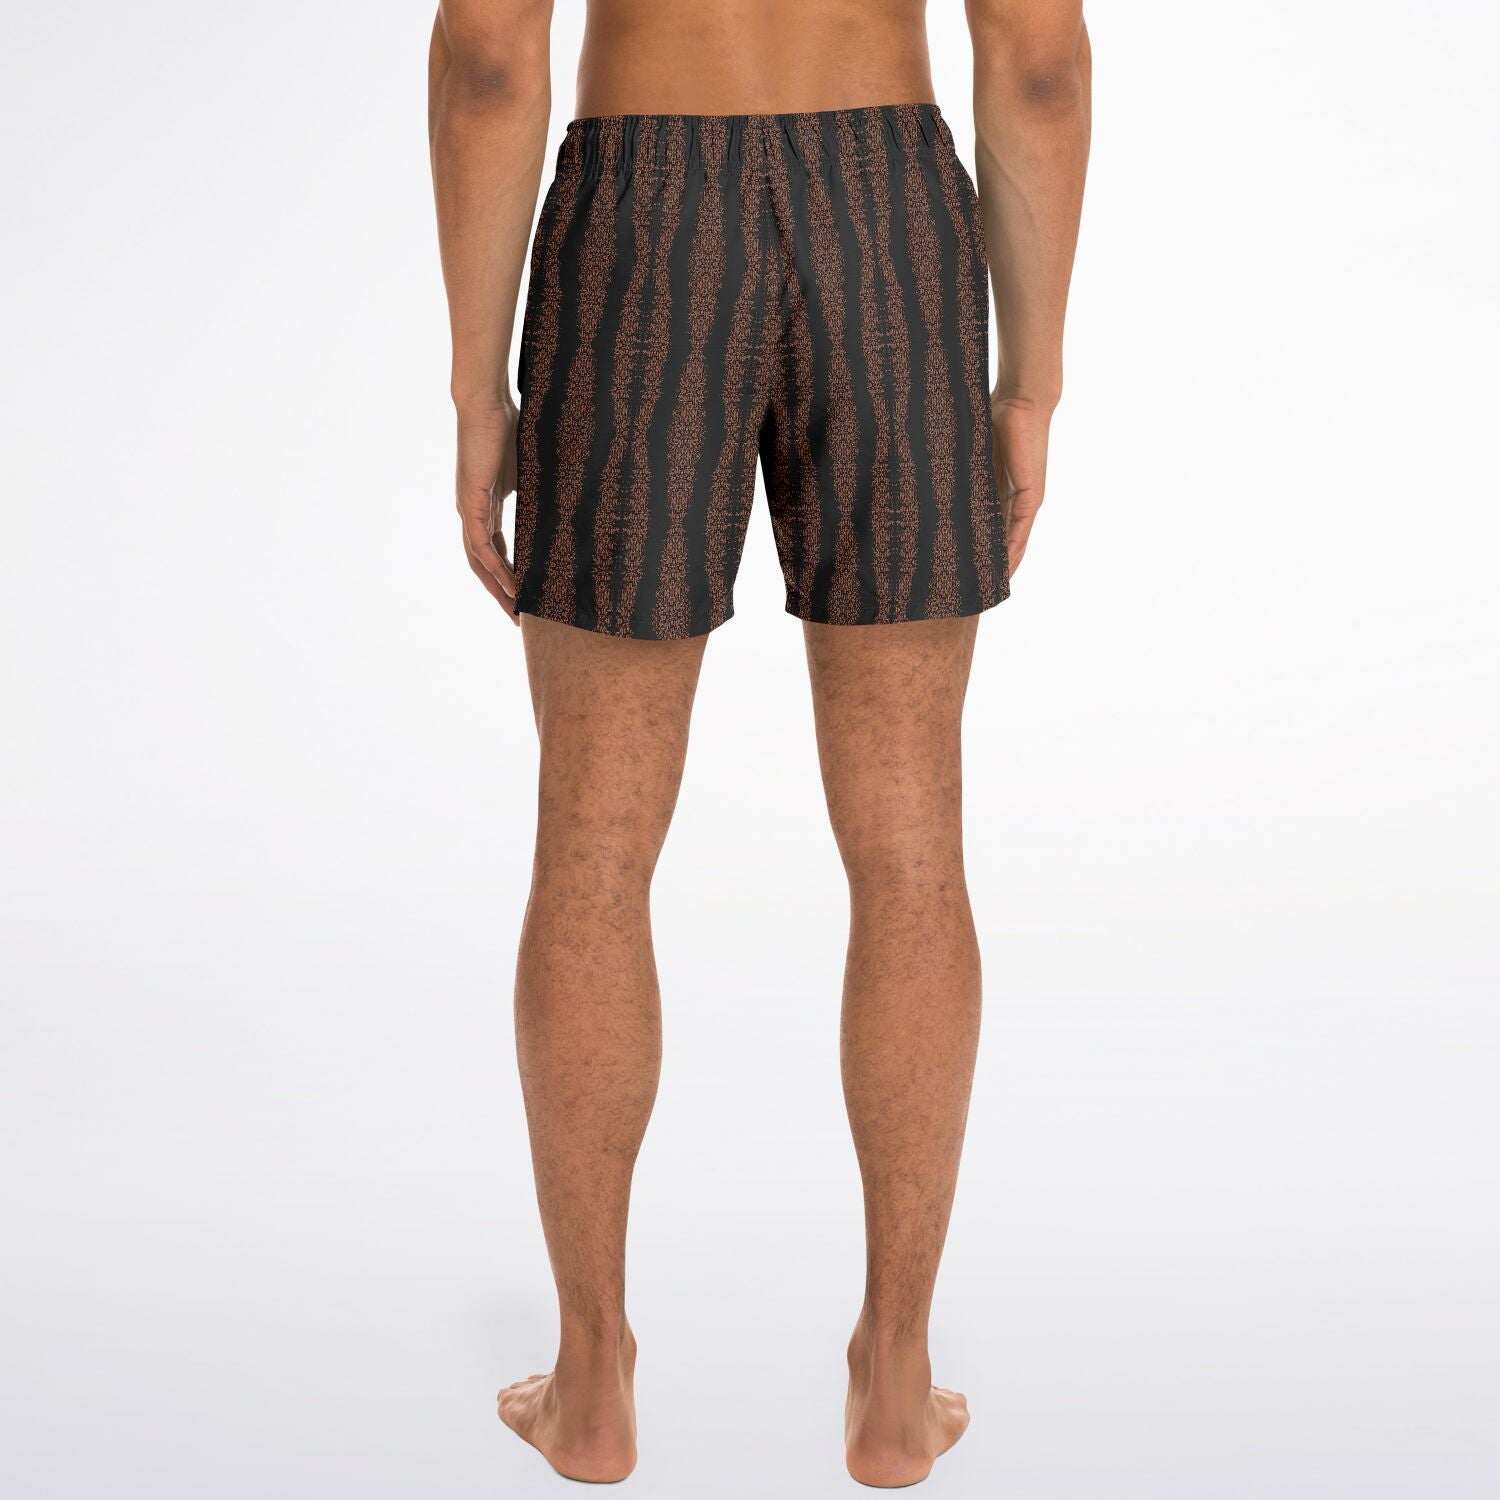 back view of mens swimming trunks with a black designer print